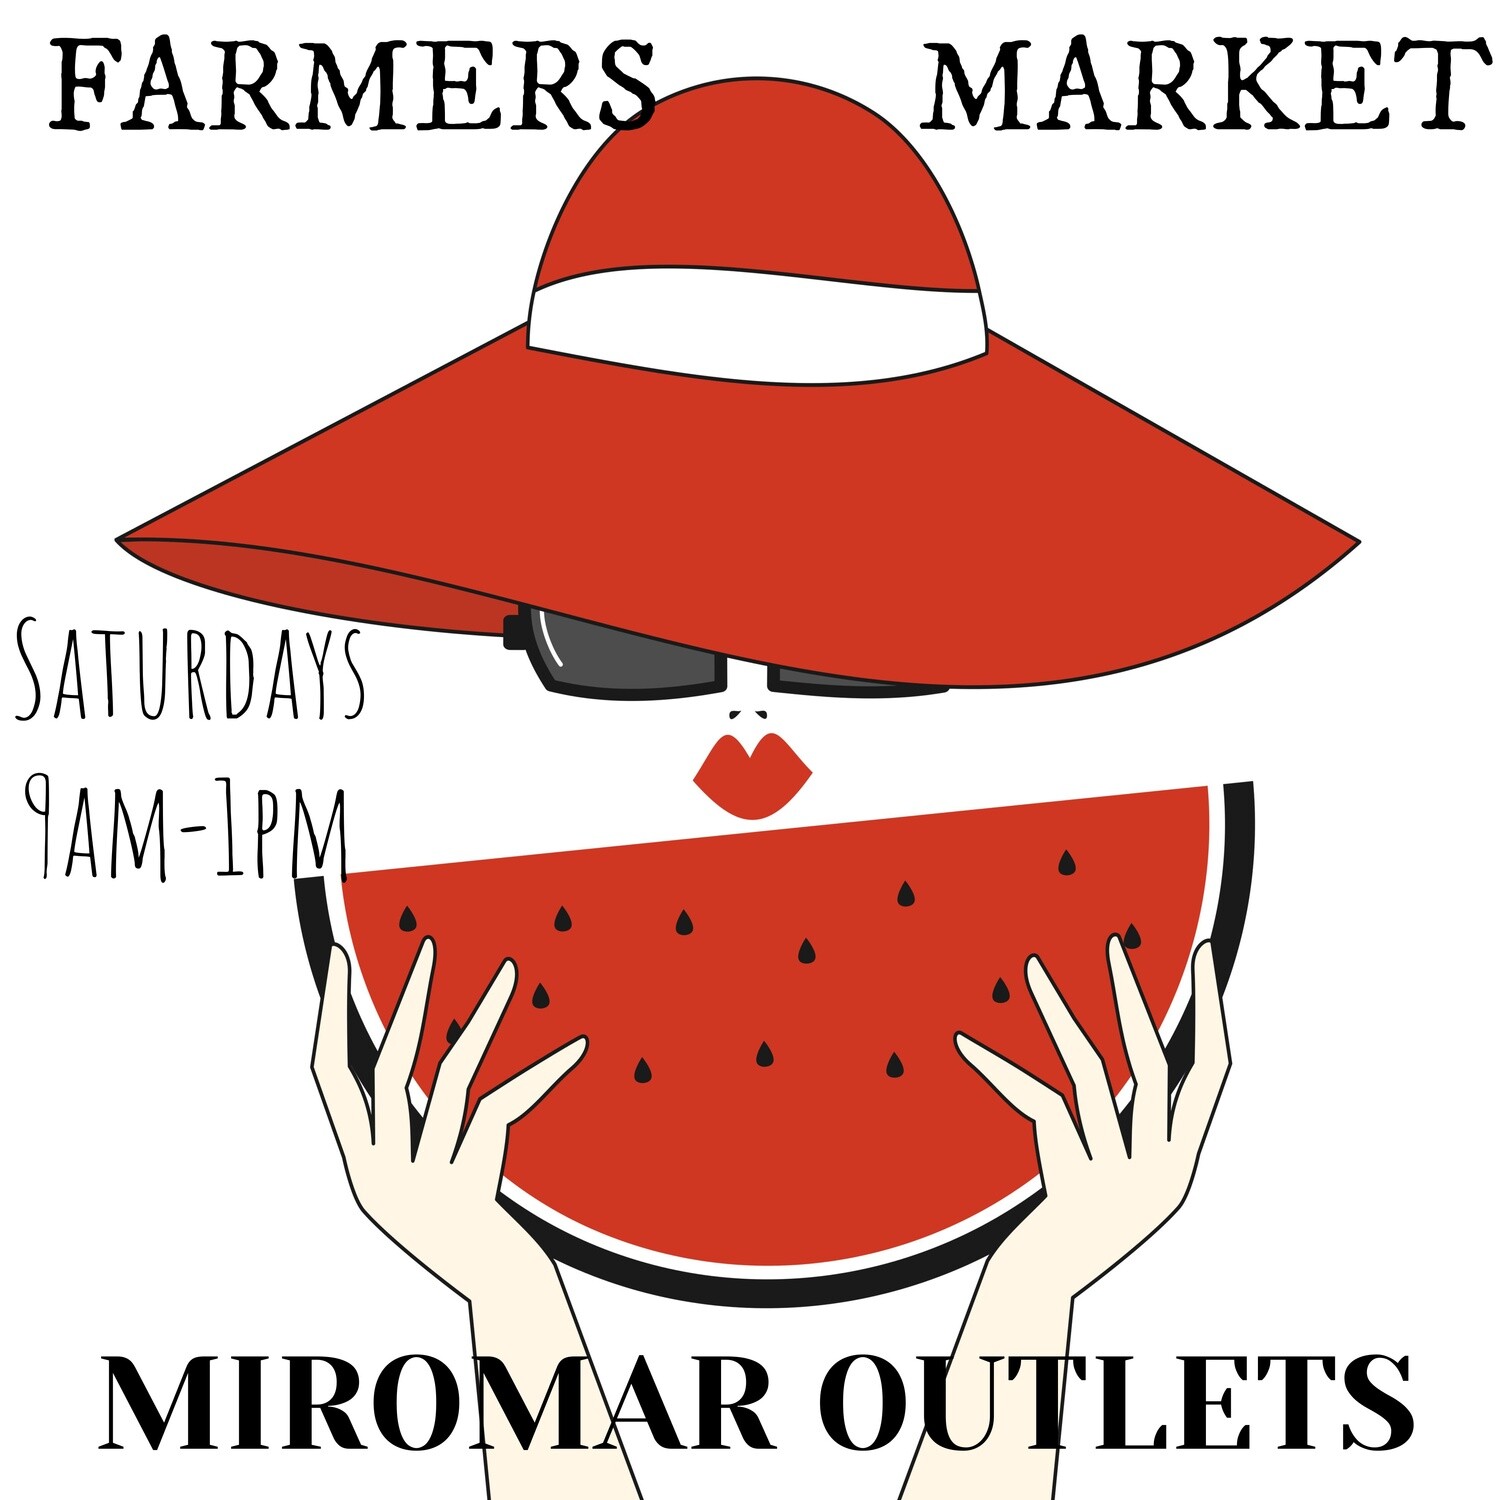 Estero Farmers Market at Miromar Outlets JANUARY 4 weeks